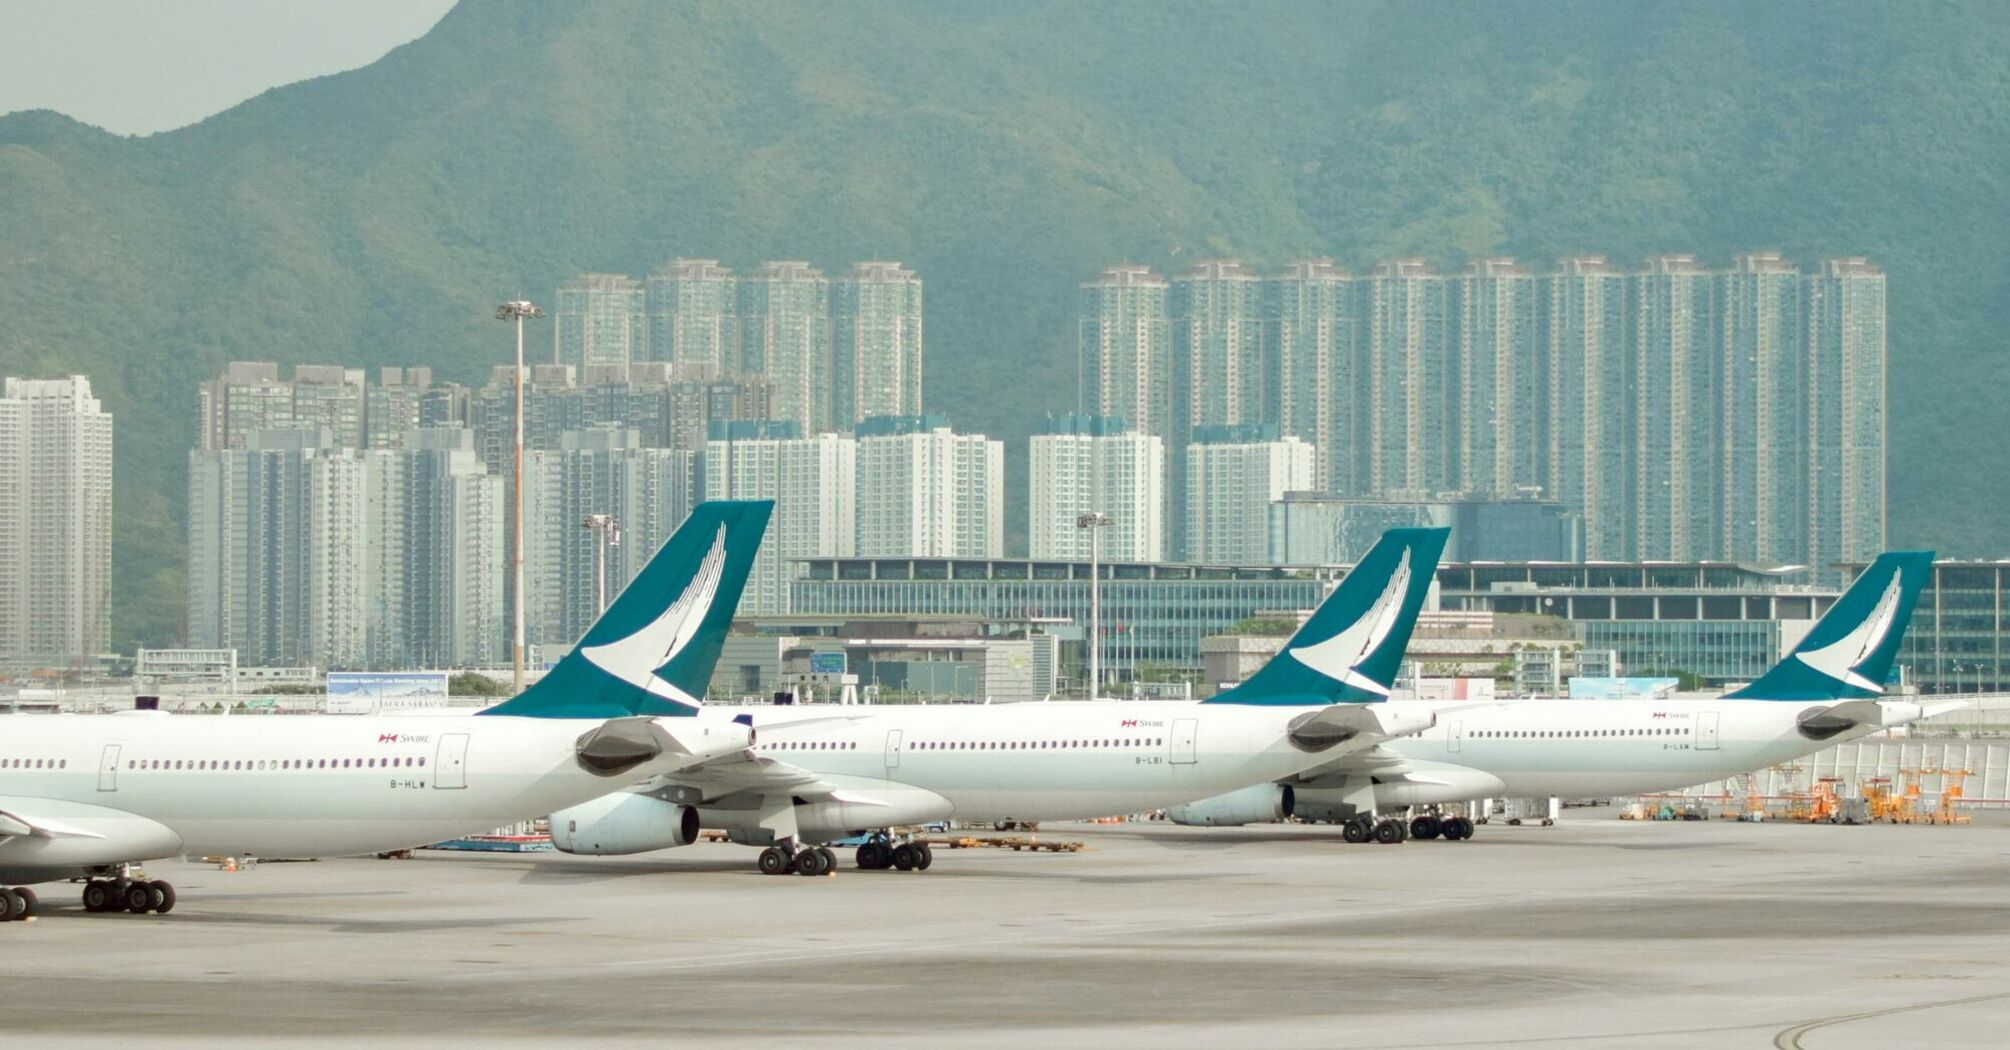 Cathay Pacific airplanes at the airport with city skyline in the background